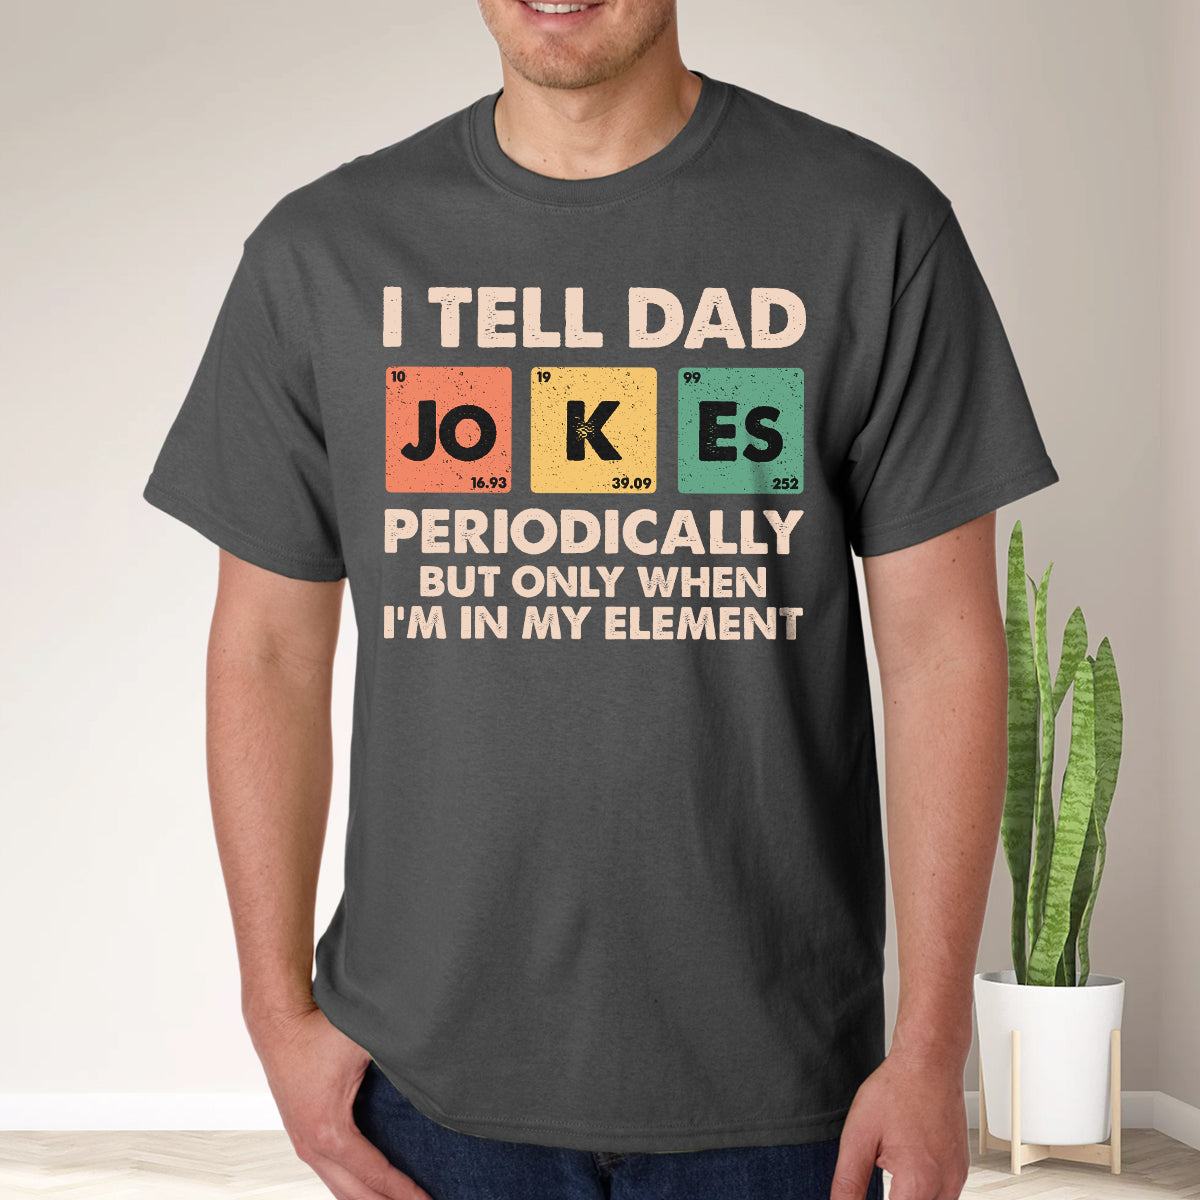 Teesdily | Dad Jokes Shirt, I Tell Dad Jokes Periodically But Only When I'm In My Element Sweatshirt Hoodie, Fathers Day Funny Gifts Mug